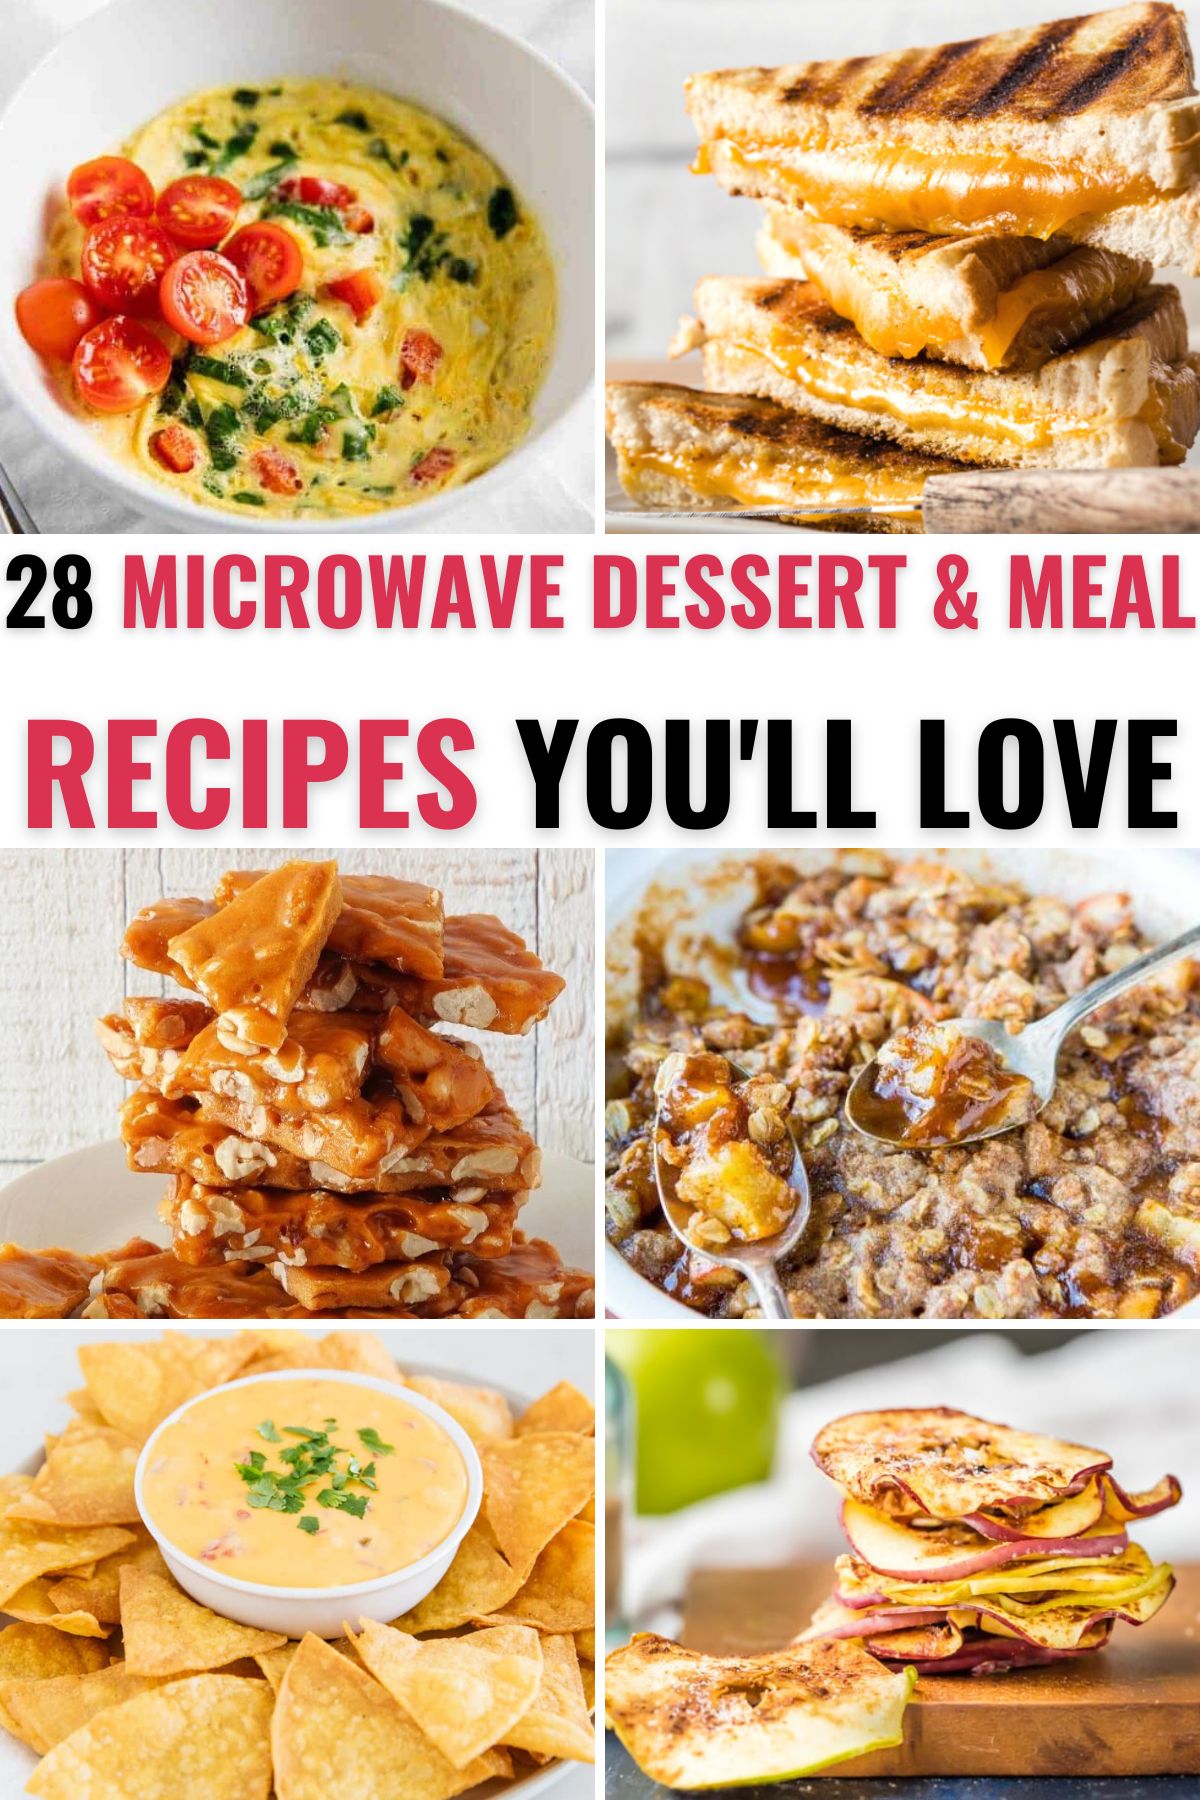 A collection of microwave desserts, meals, and snacks